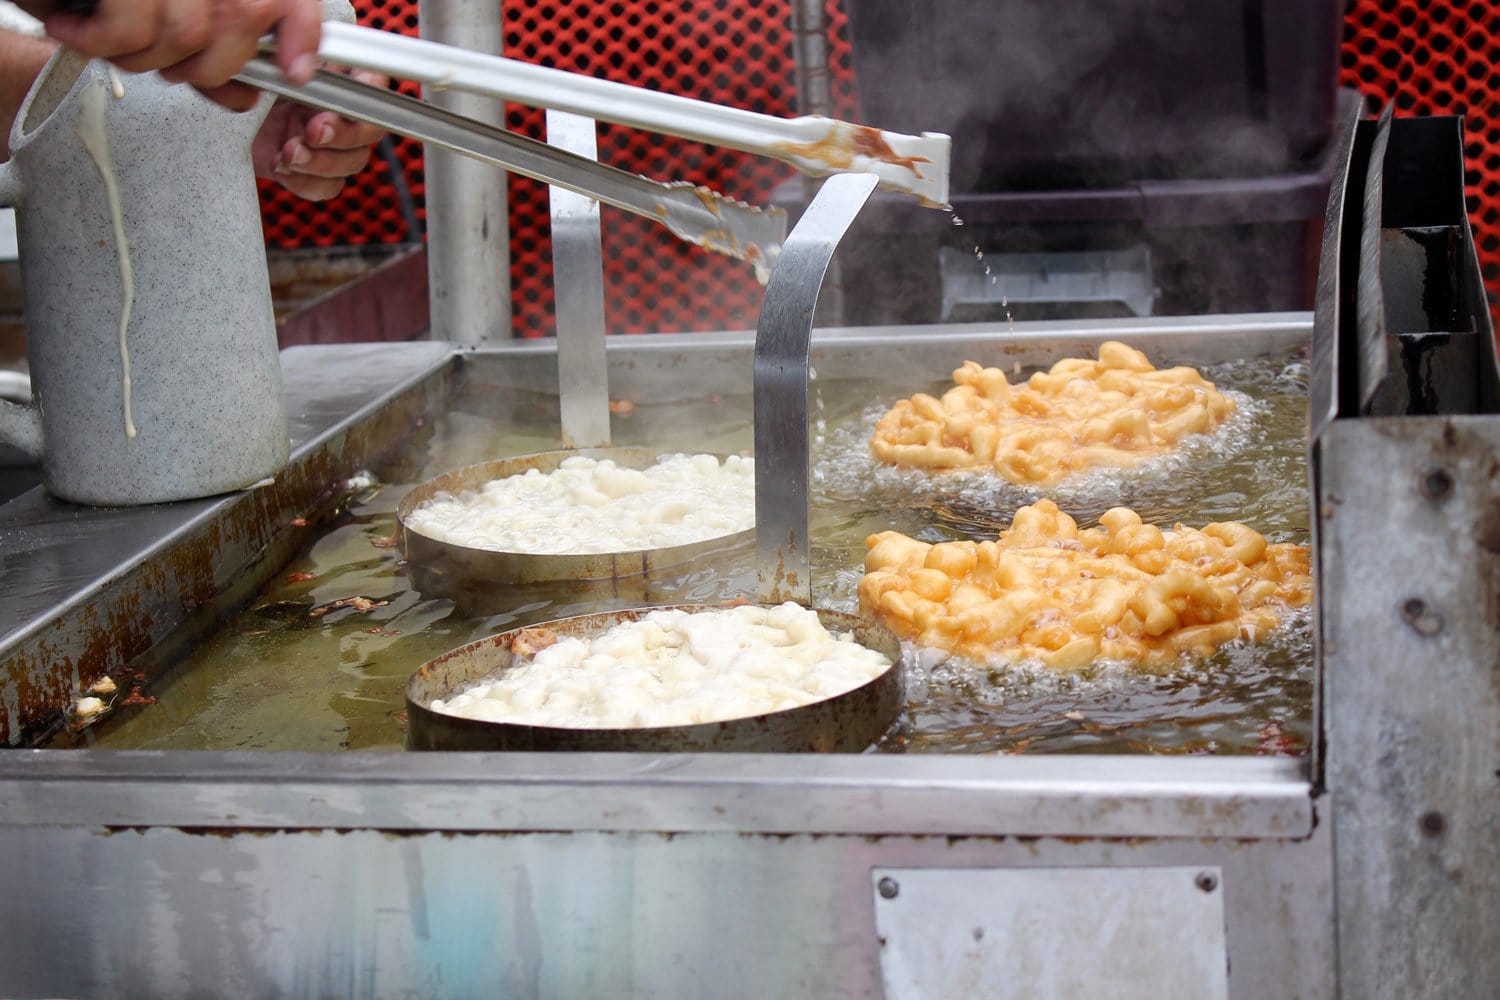 How they make funnel cakes